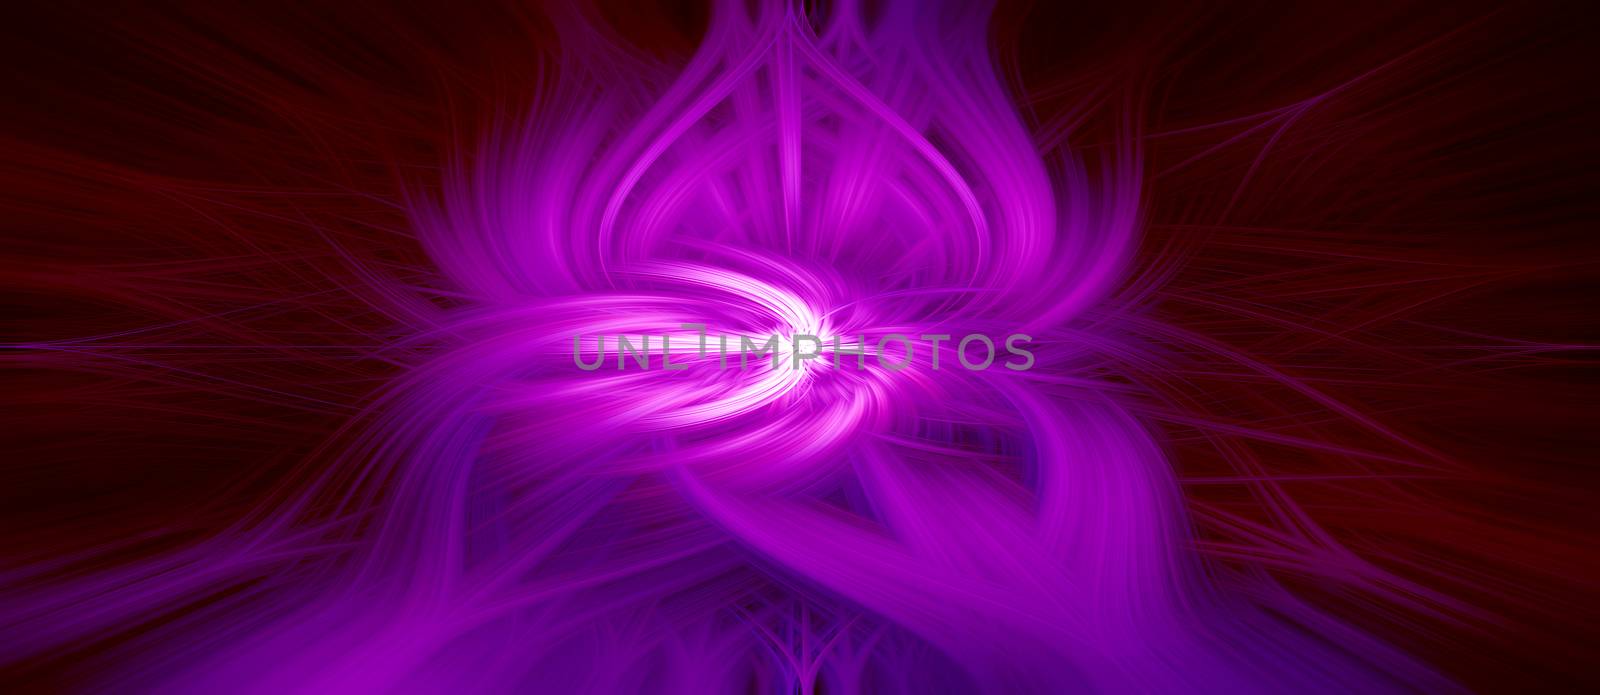 Beautiful abstract intertwined symmetrical 3d fibers forming a shape of sparkle, flame, flower, interlinked hearts. Maroon, white, and purple colors. Illustration.